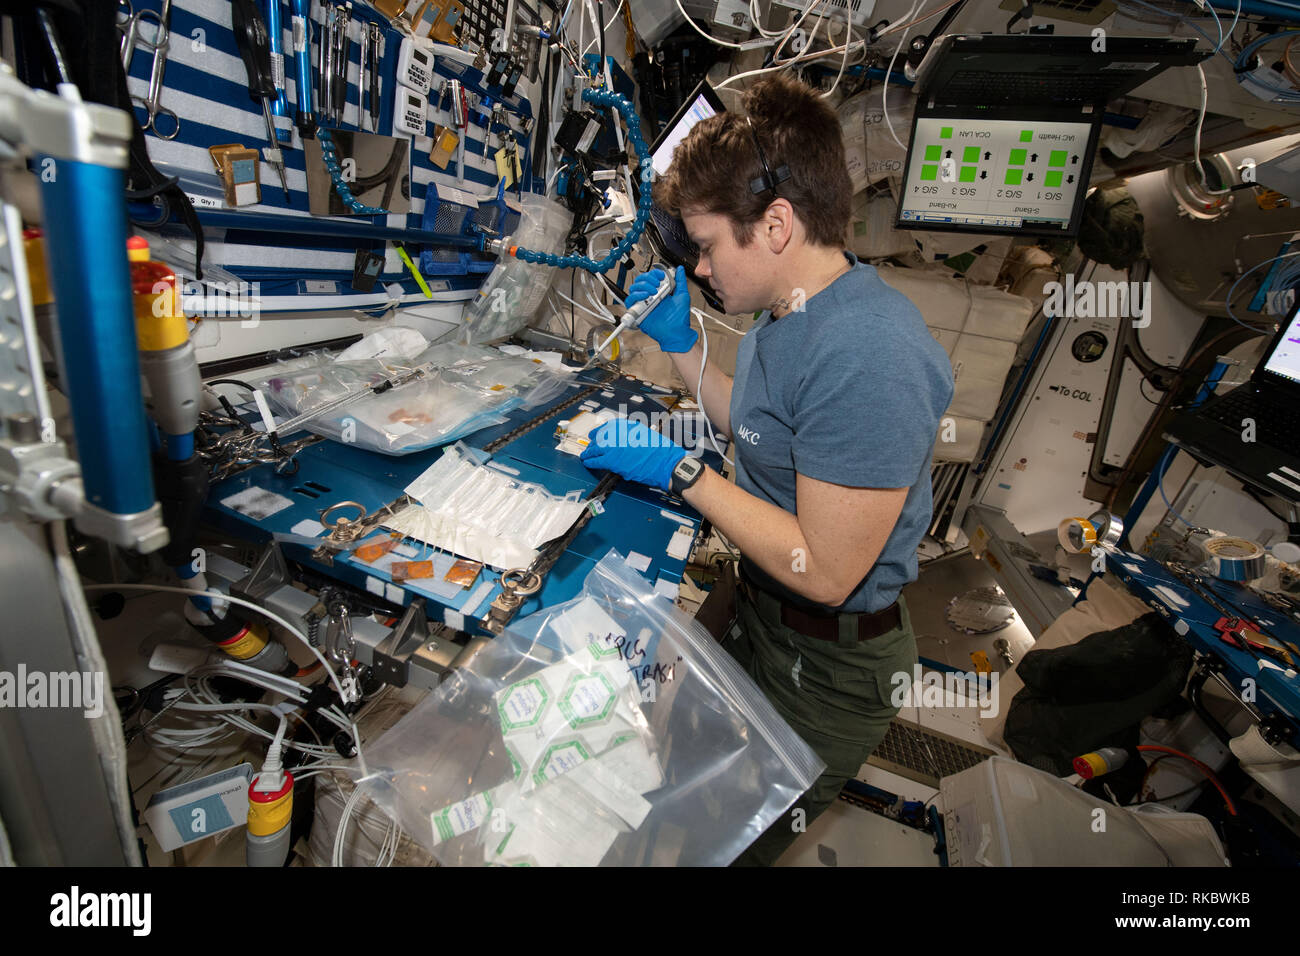 NASA astronaut Anne McClain works inside the Unity module conducting research operations for the Protein Crystal Growth-16 experiment aboard the International Space Station January 2, 2019 in Earth Orbit. The Protein Crystal Growth-16 experiment is exploring therapies for treating Parkinson's disease. Stock Photo